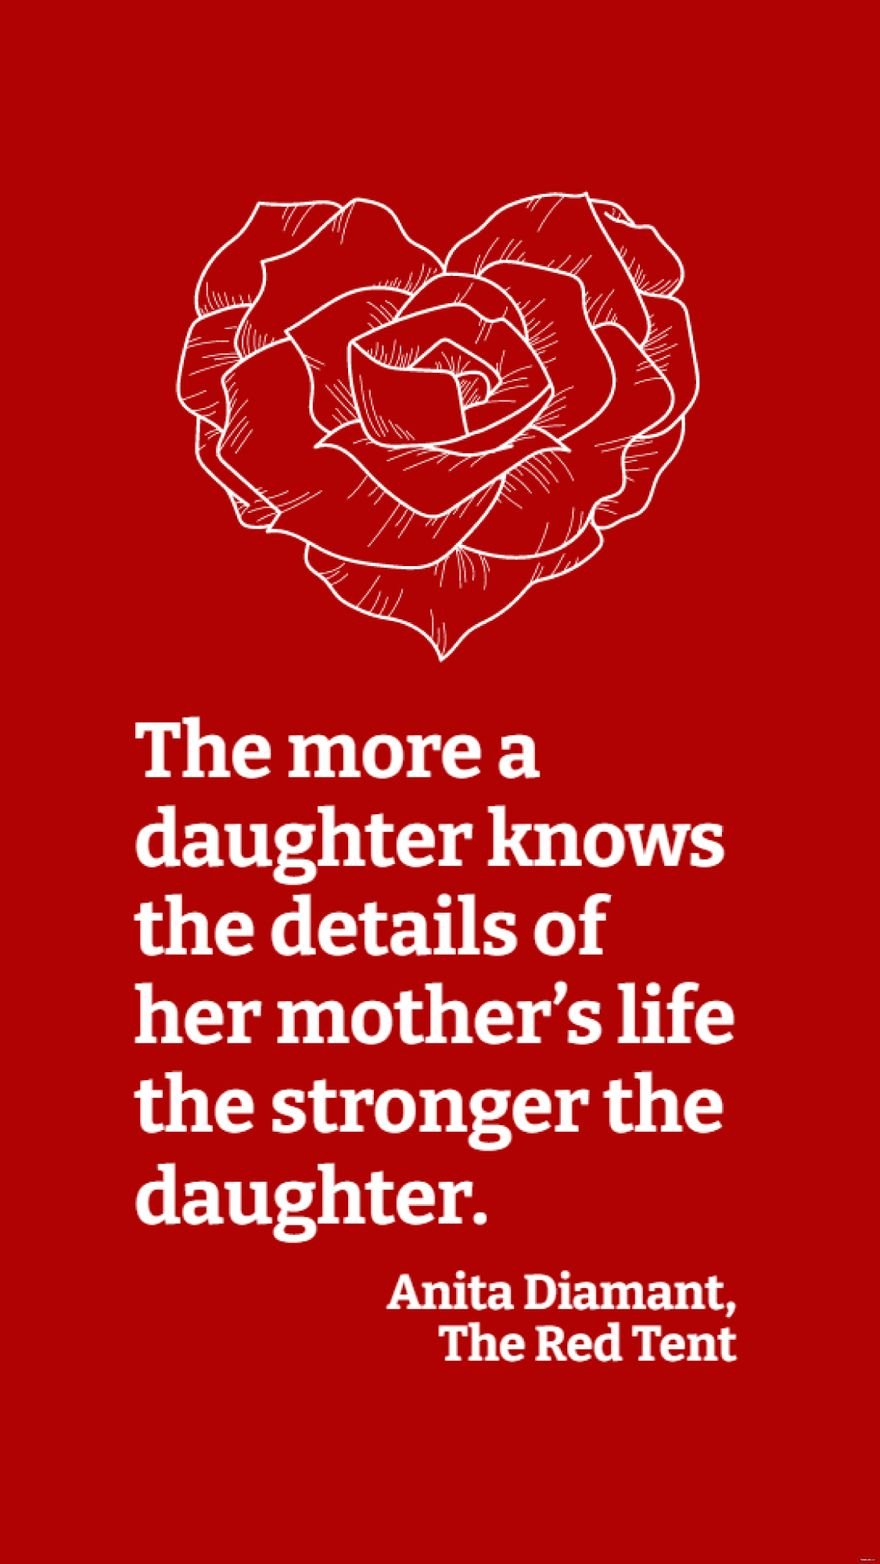 Anita Diamant, The Red Tent - The more a daughter knows the details of her mother’s life the stronger the daughter.